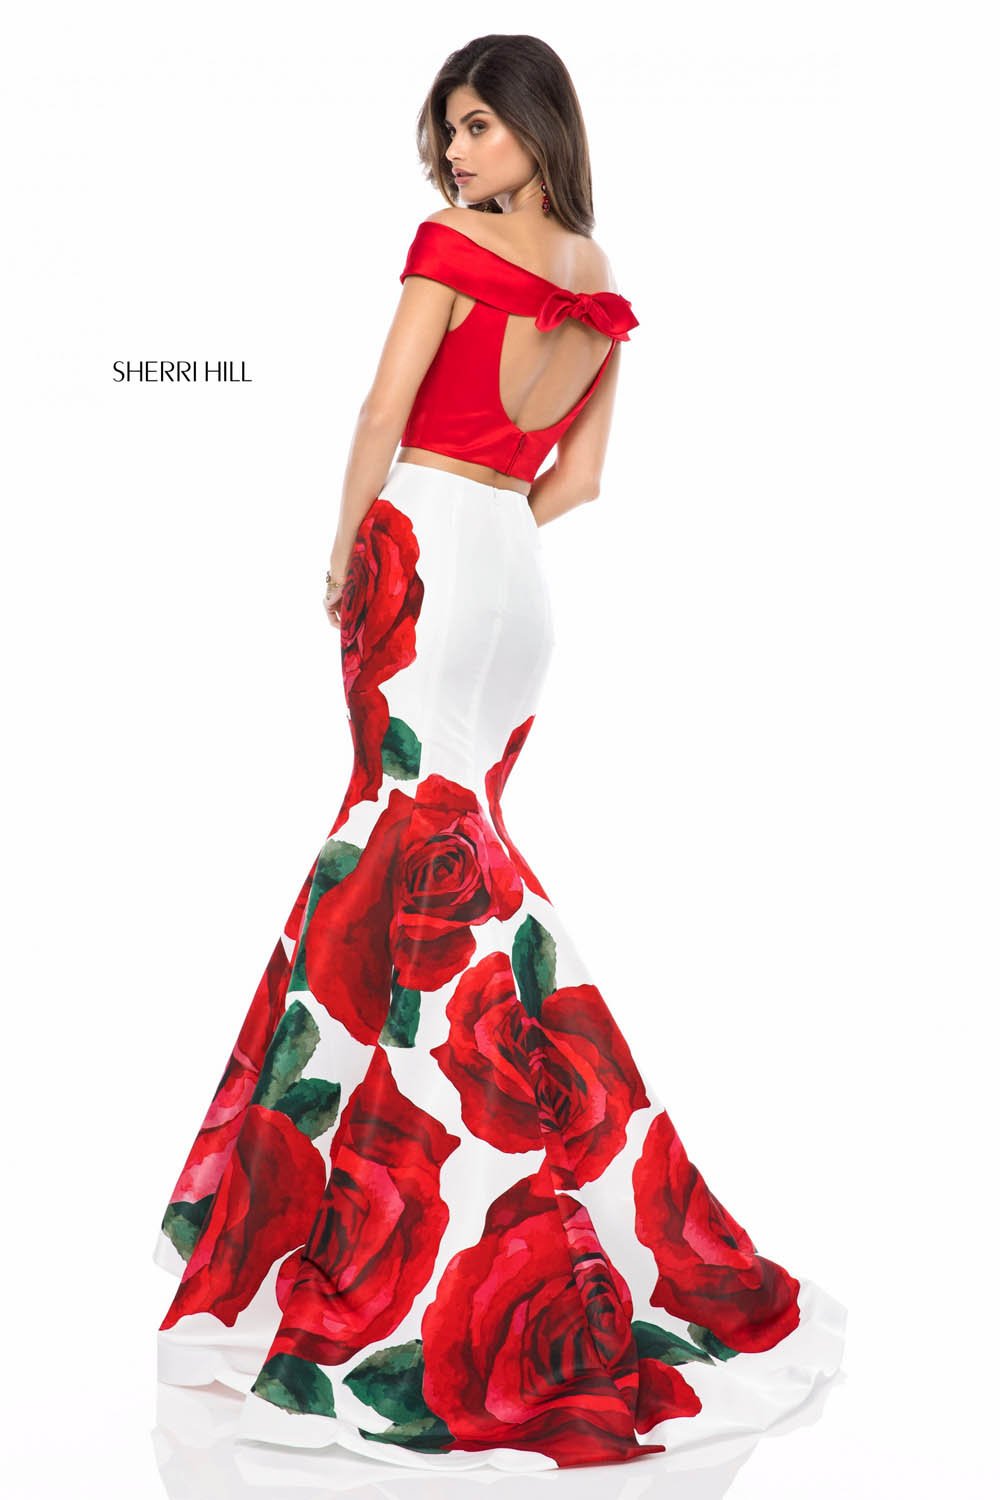 Sherri Hill 51850 dress images in these colors: Red Print, Red Black Print.